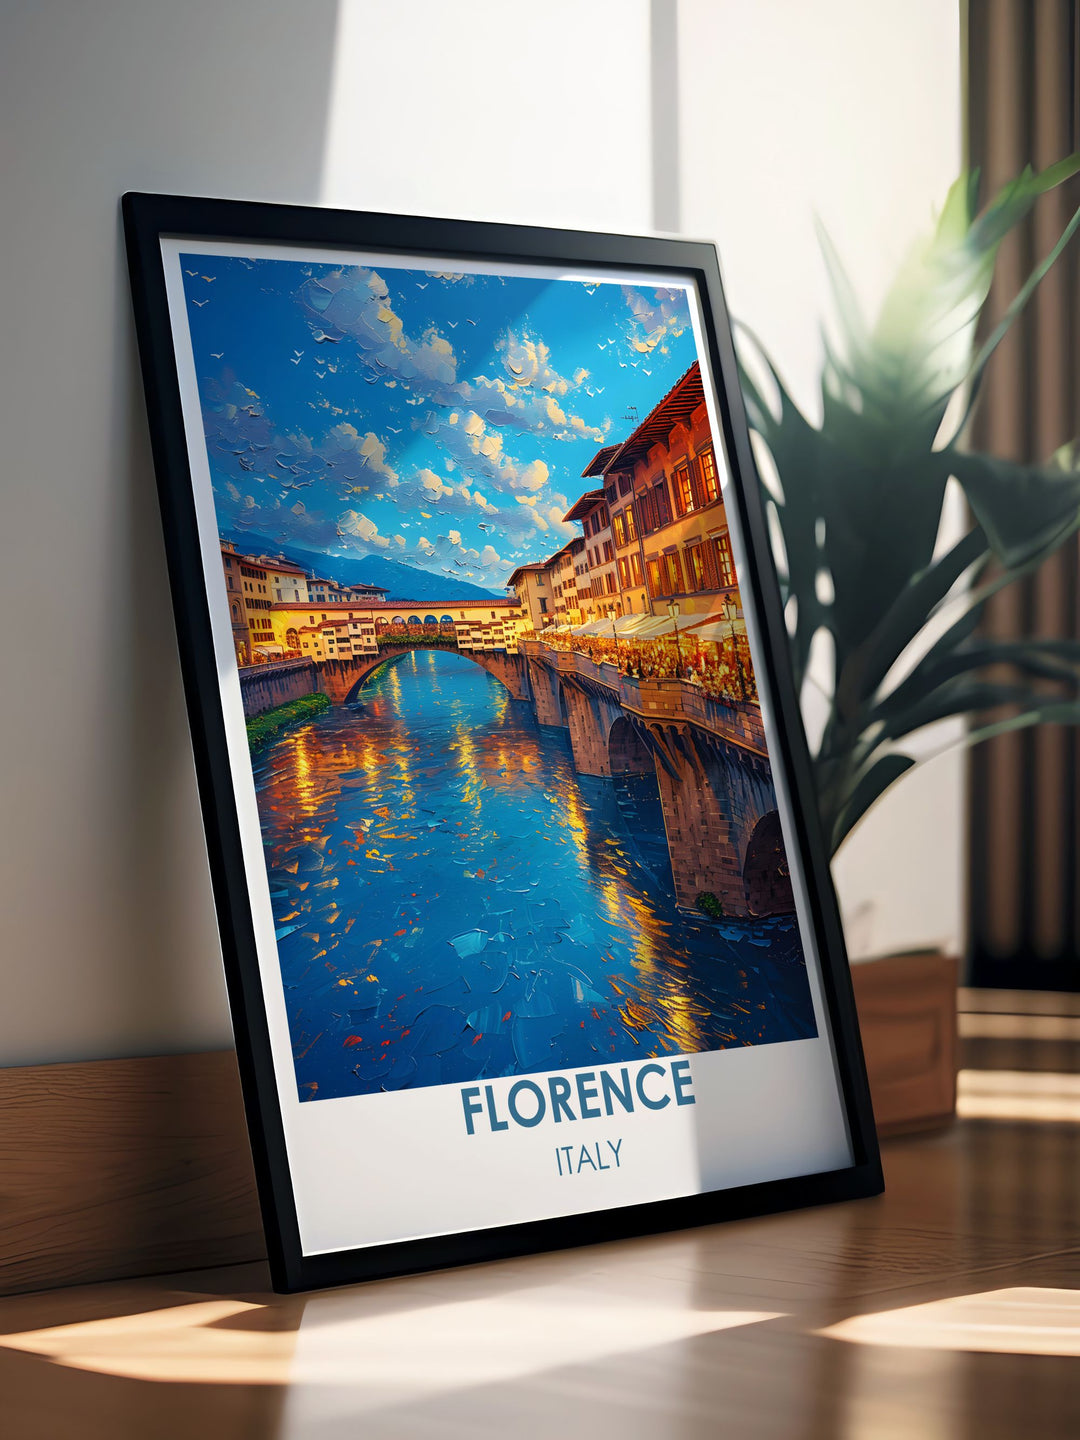 Custom print of Florences Ponte Vecchio, offering a unique perspective on this iconic landmark.